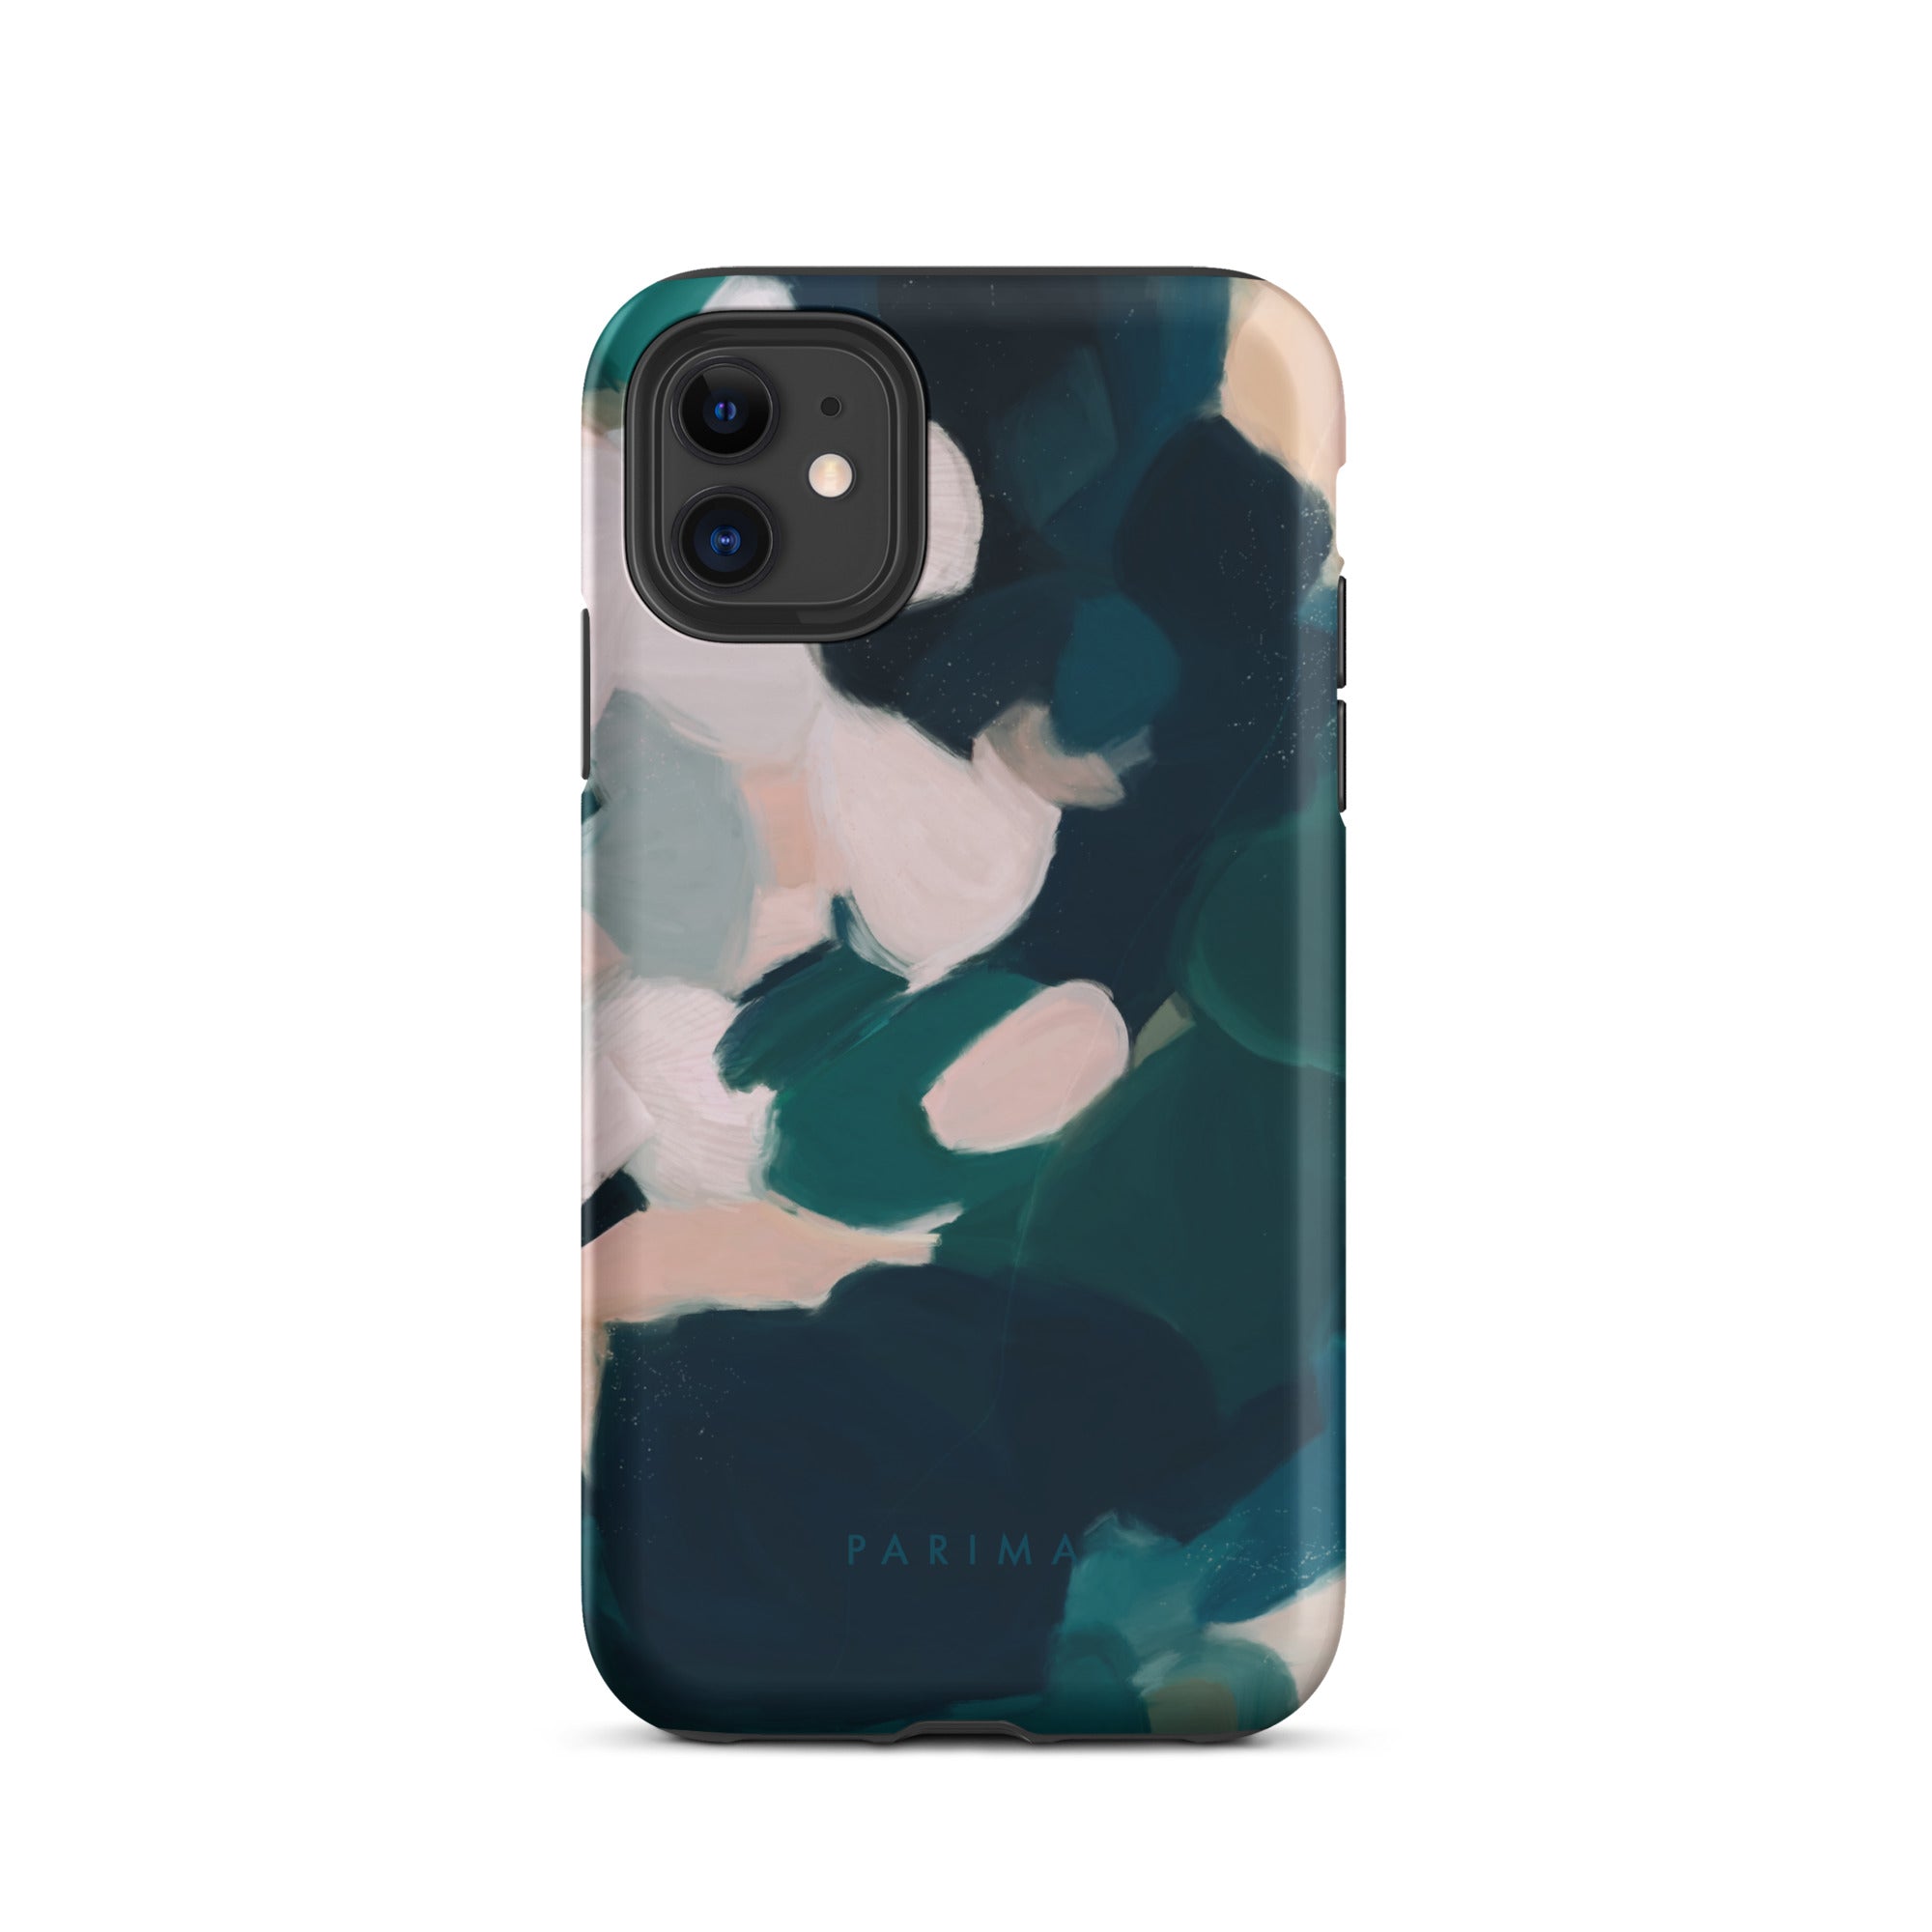 Aerwyn, green and pink abstract art - iPhone 11 tough case by Parima Studio